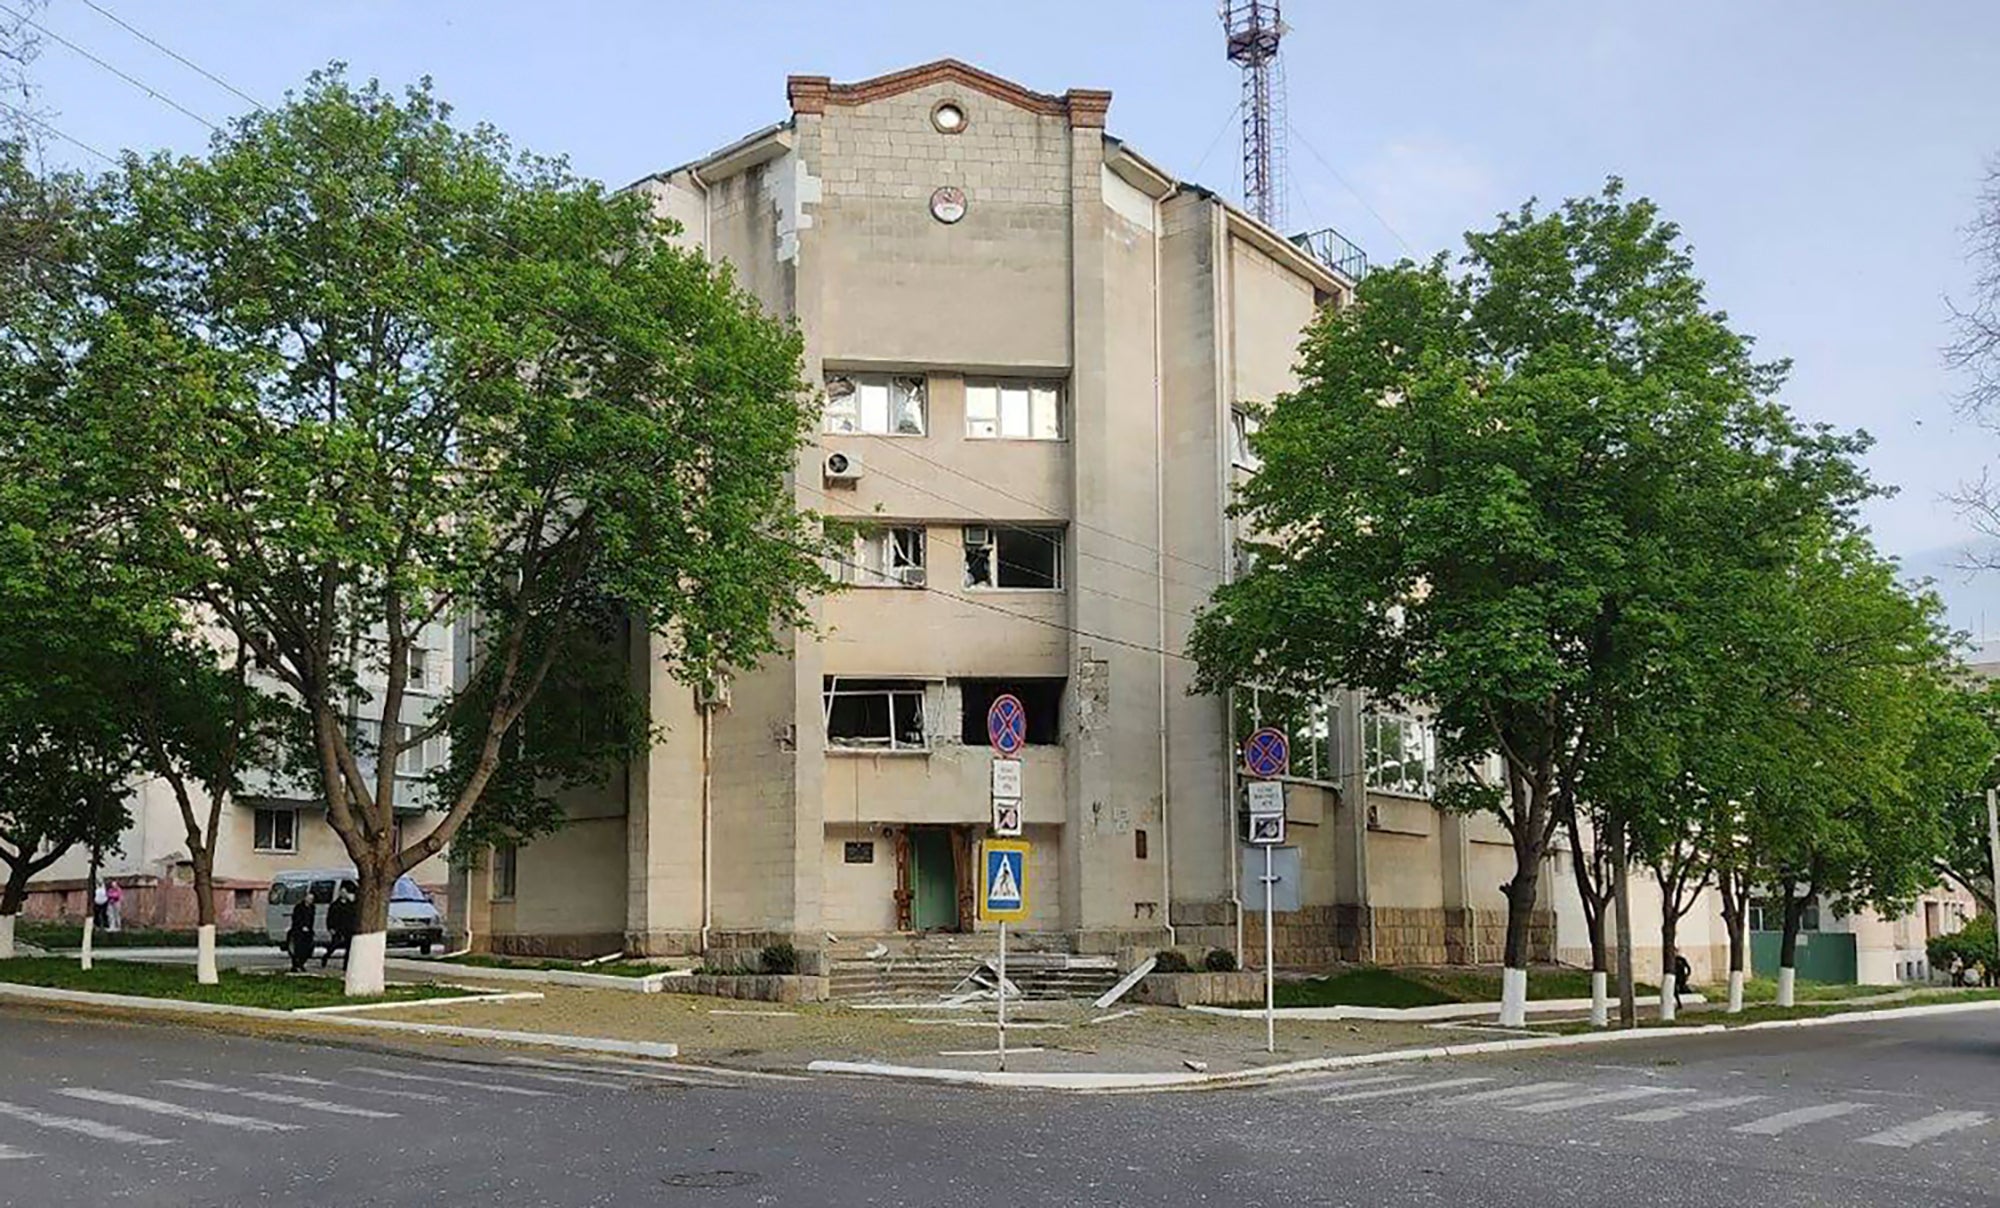 The damaged headquarters of the Ministry of State Security in Tiraspol, capital of Transnistria